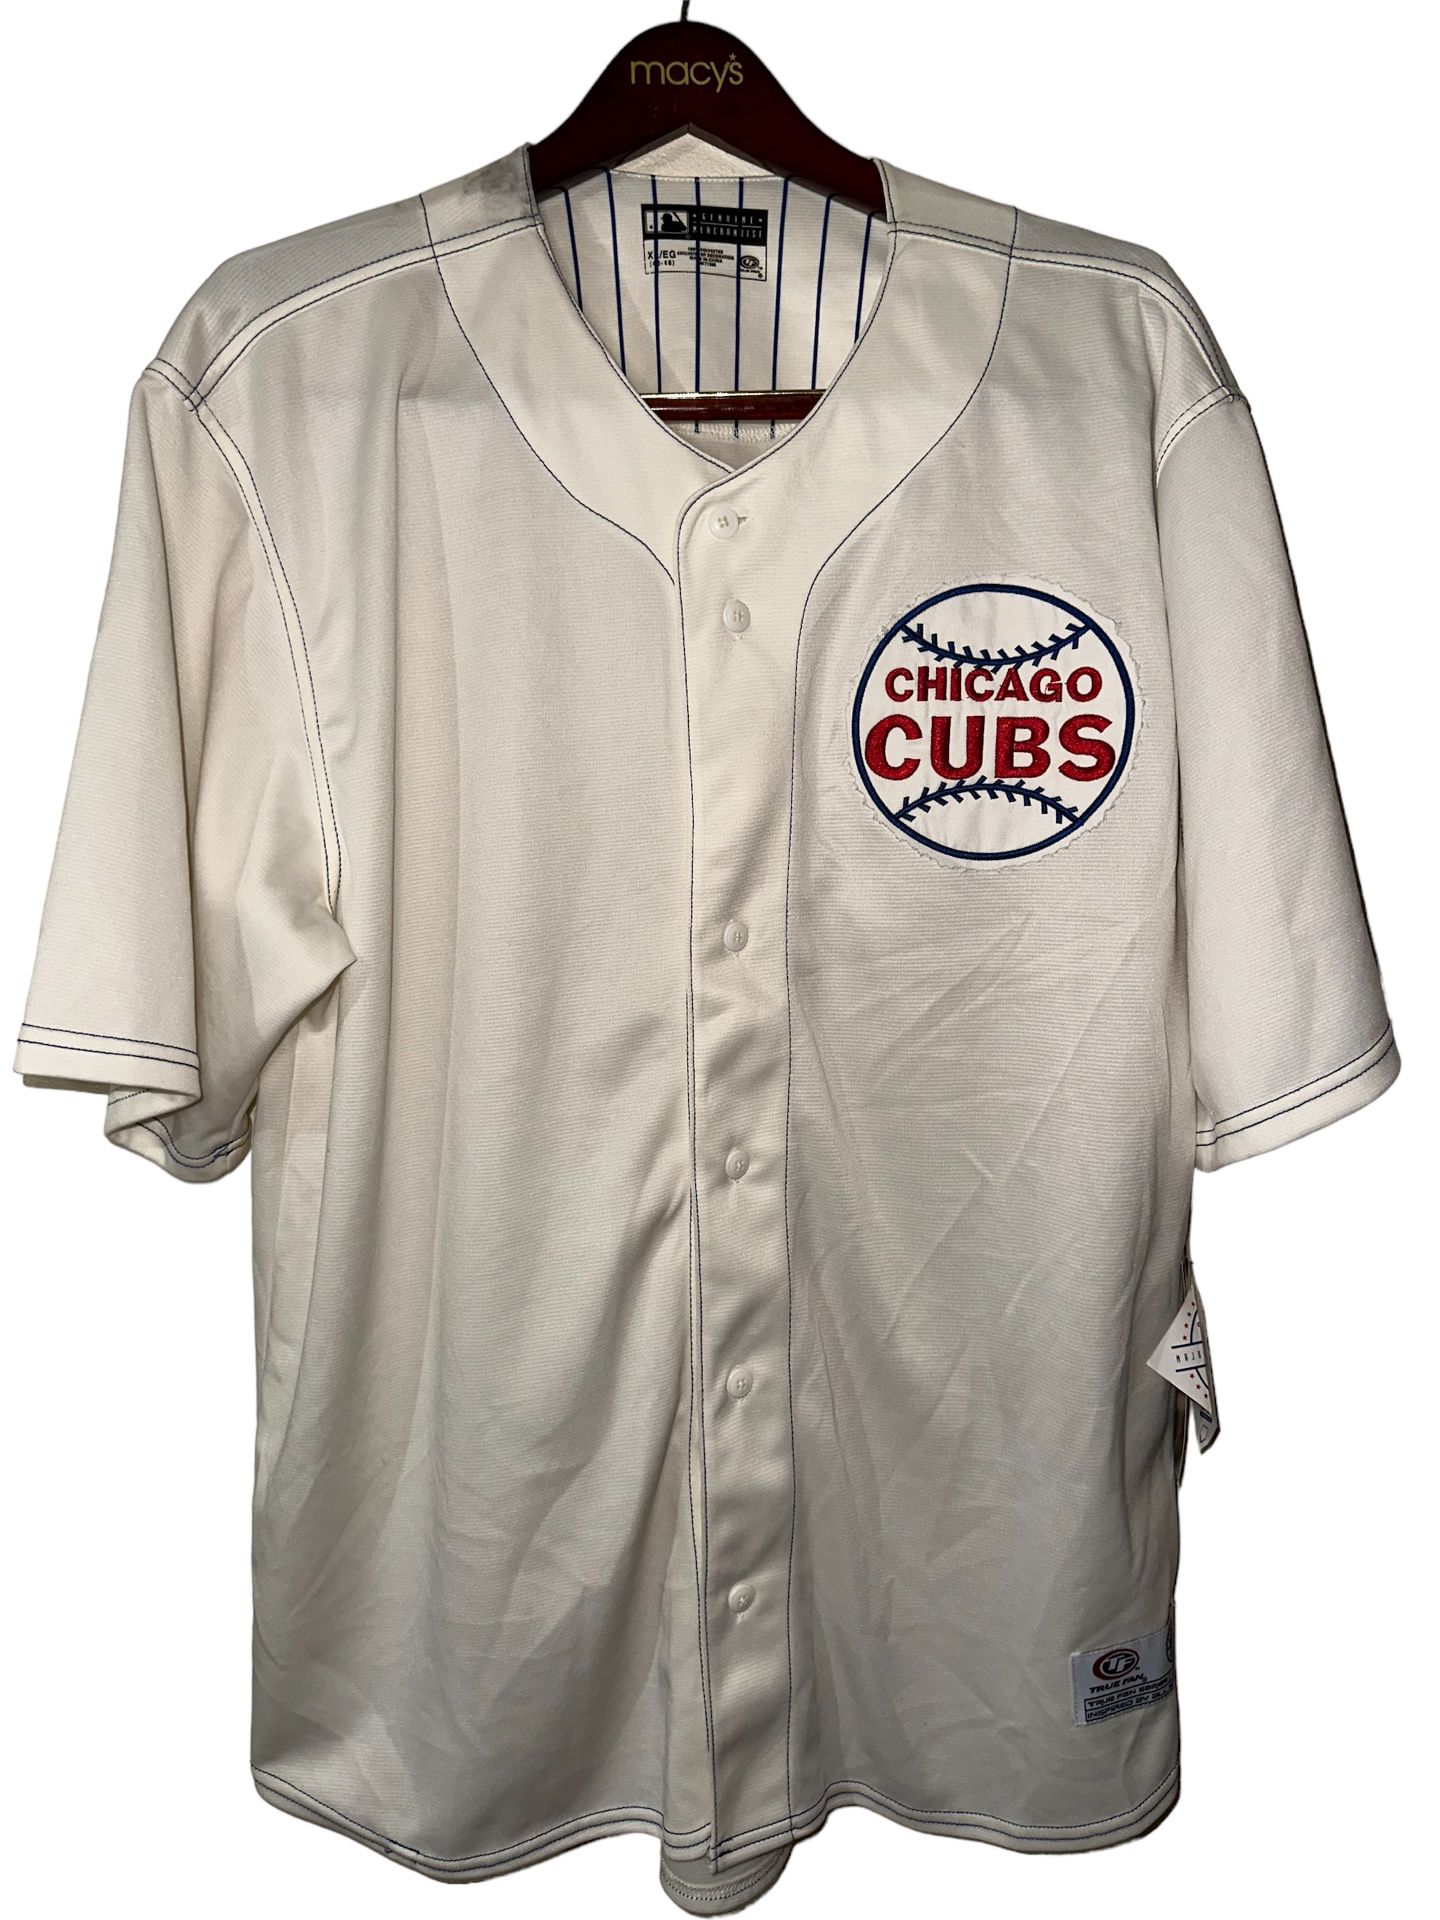 Vintage True Fan MLB Chicago Cubs Button Down Baseball Jersey XL RARE for  Sale in La Feria, TX - OfferUp